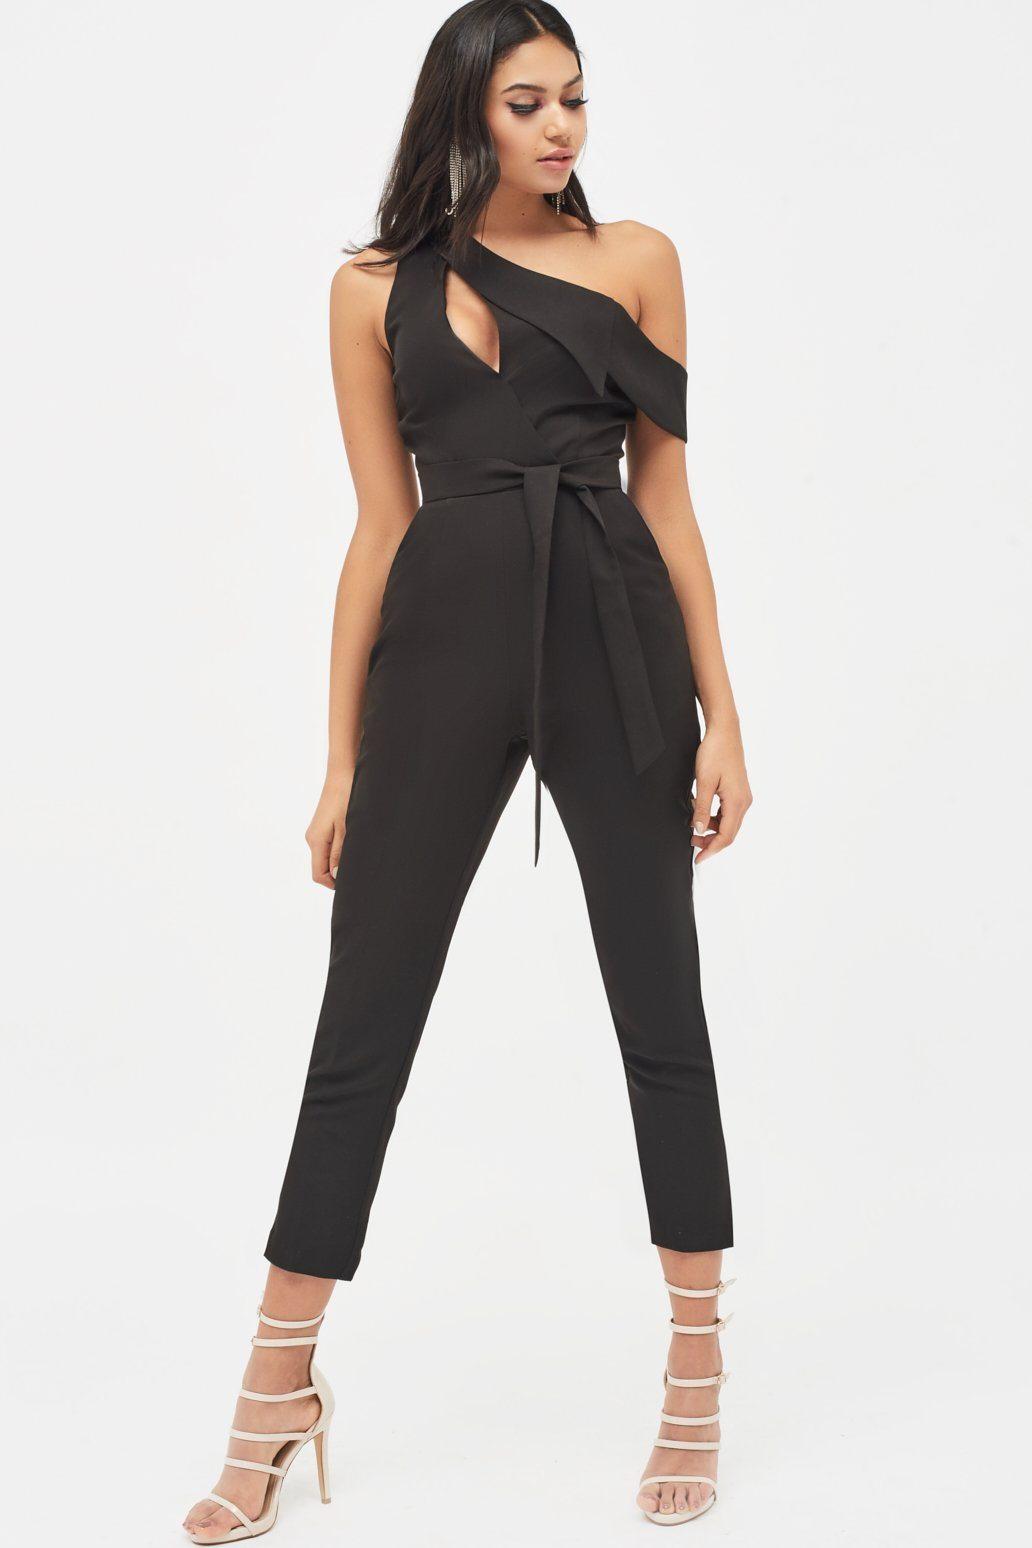 Lavish Alice Synthetic Cut Out One Shoulder Lapel Tailored Jumpsuit in ...